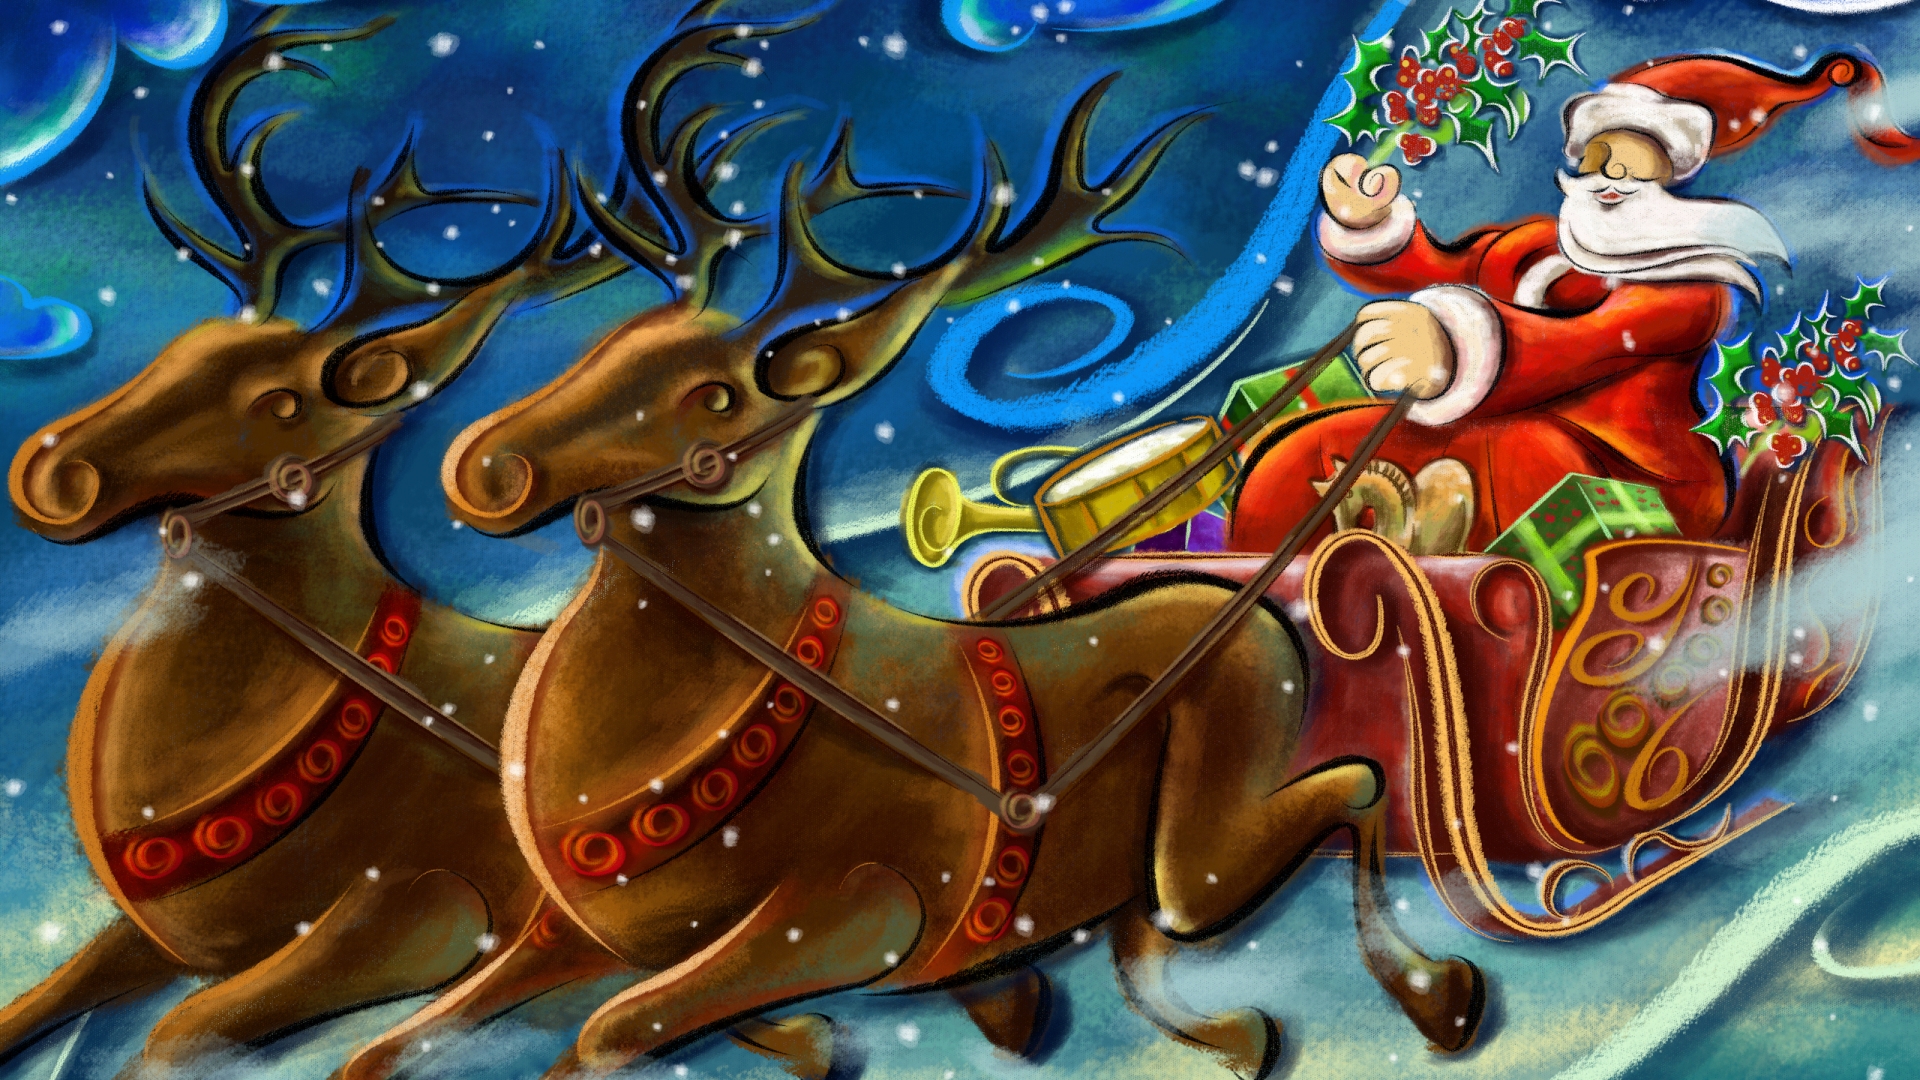 Santa Clouse Working for 1920 x 1080 HDTV 1080p resolution